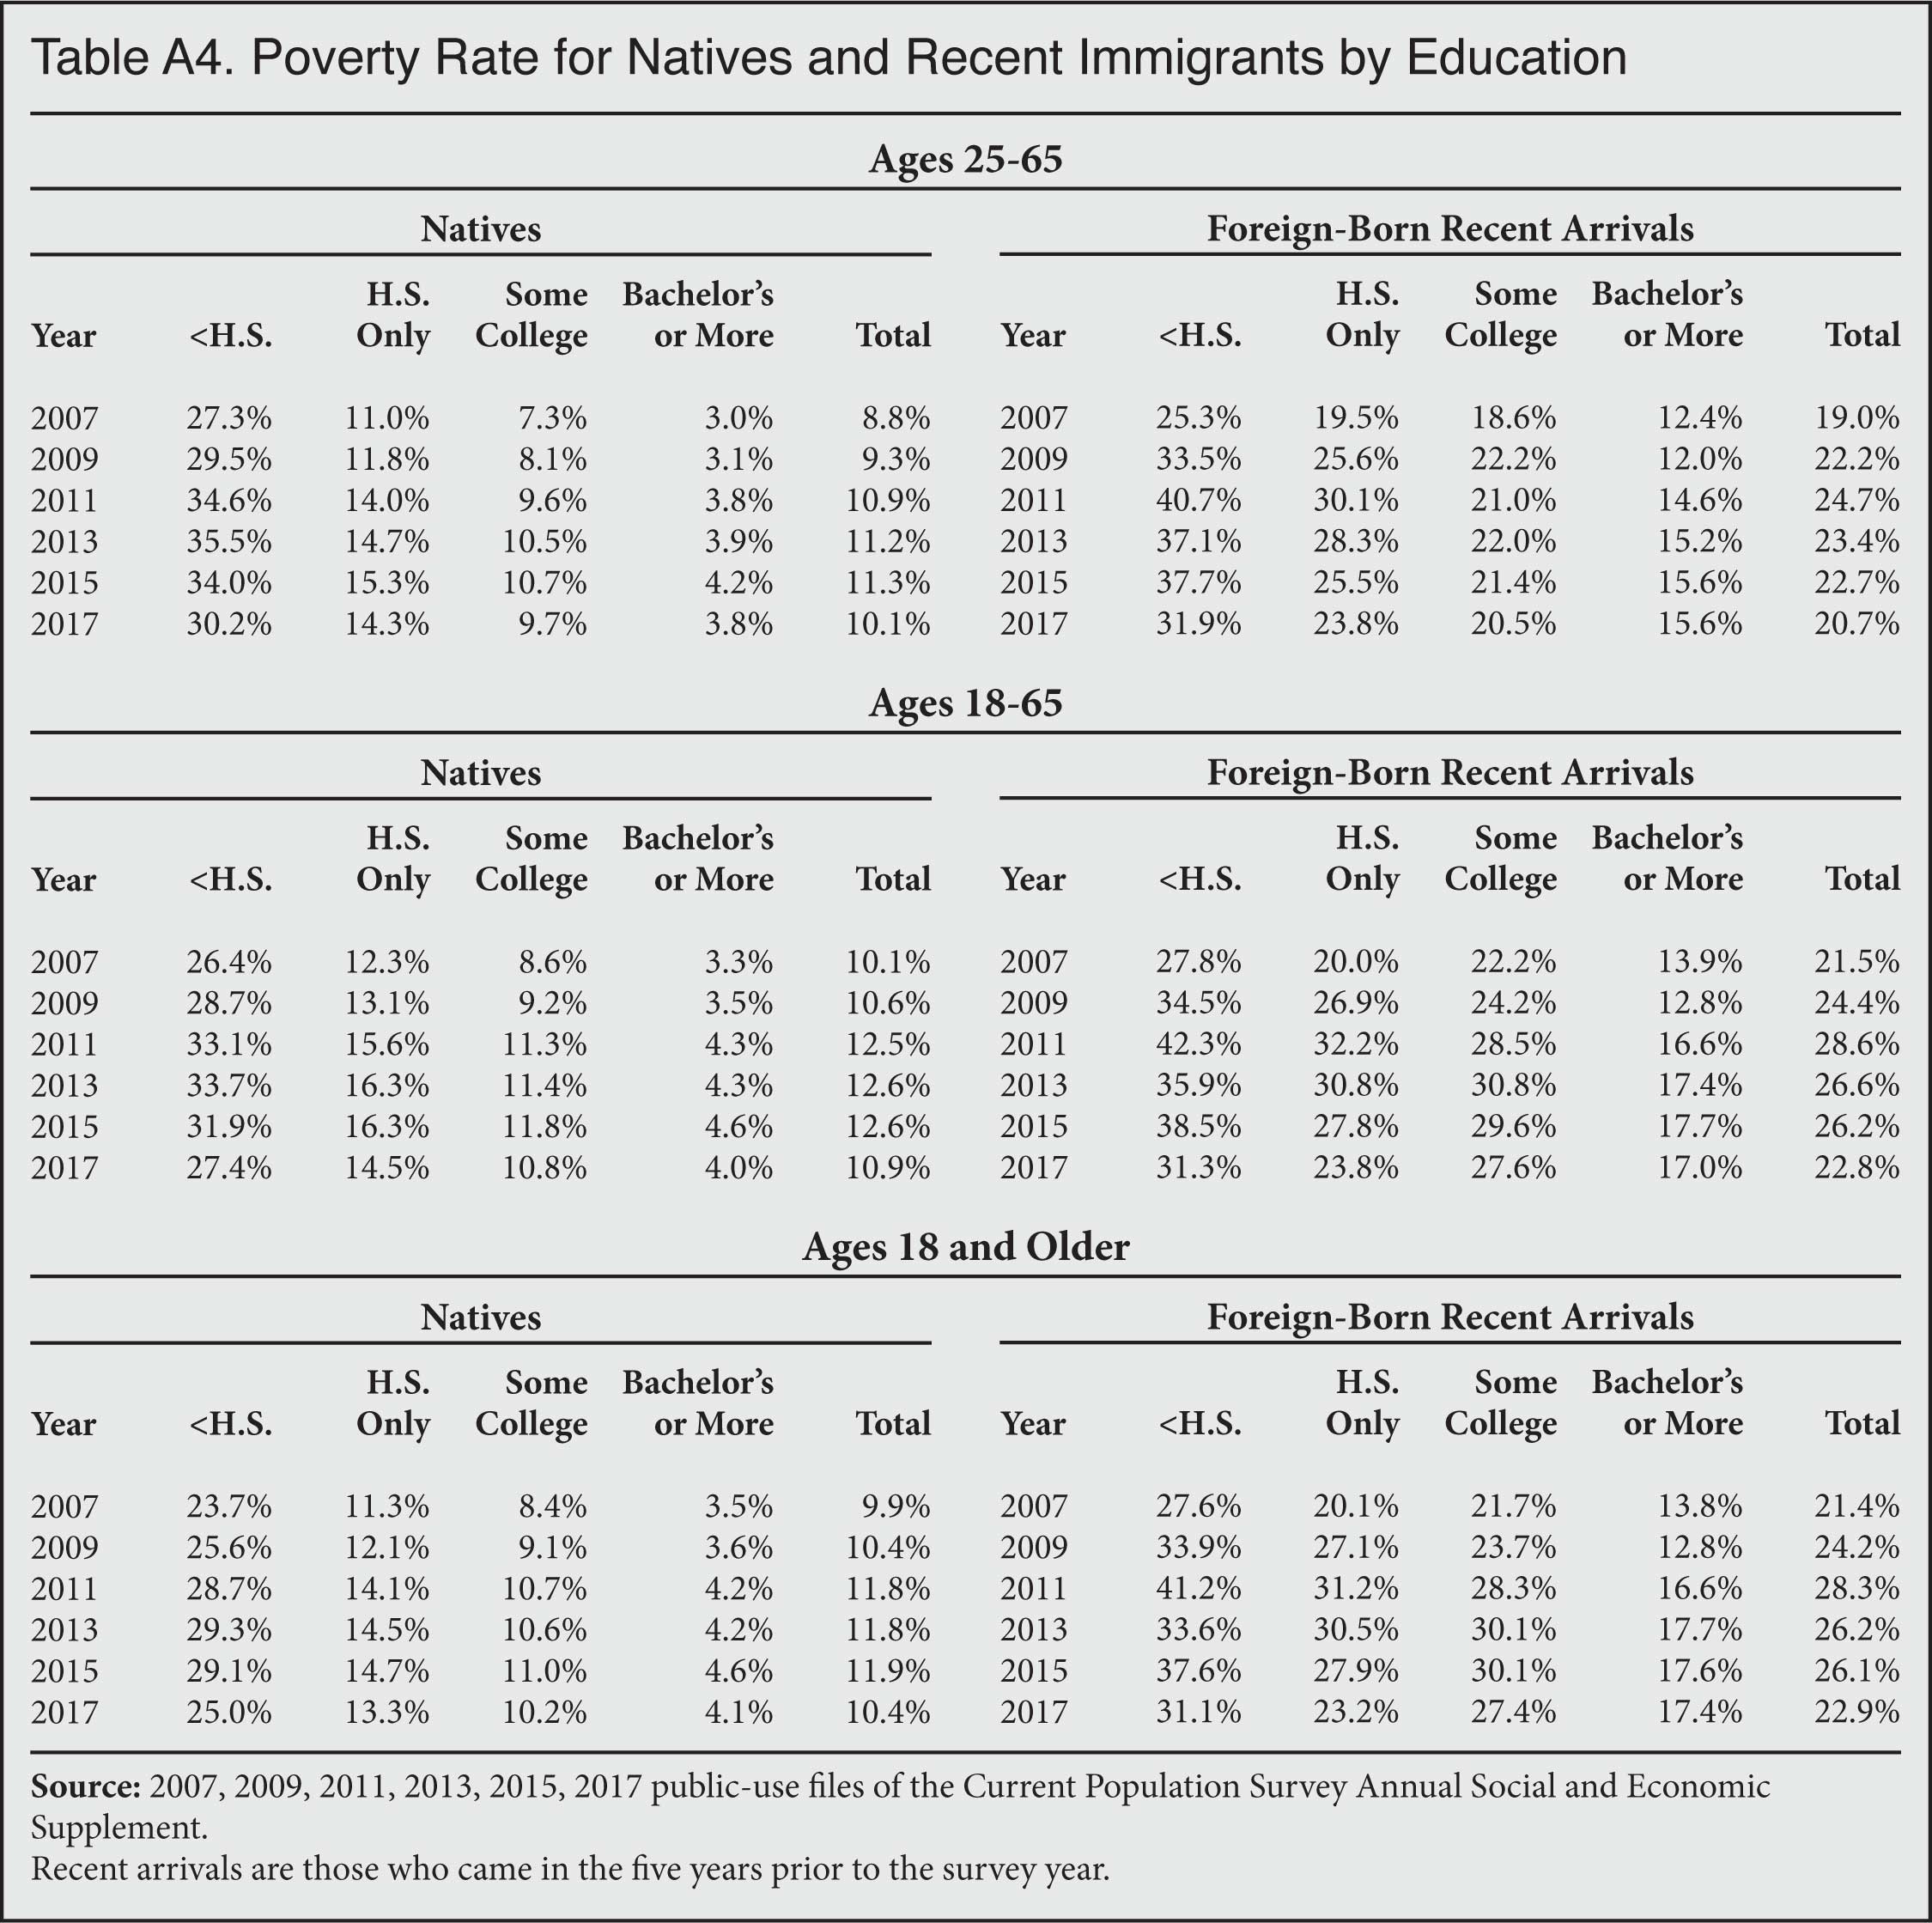 Table: Poverty Rate for Natives and Recent Immigrants by Education, 2007-2017